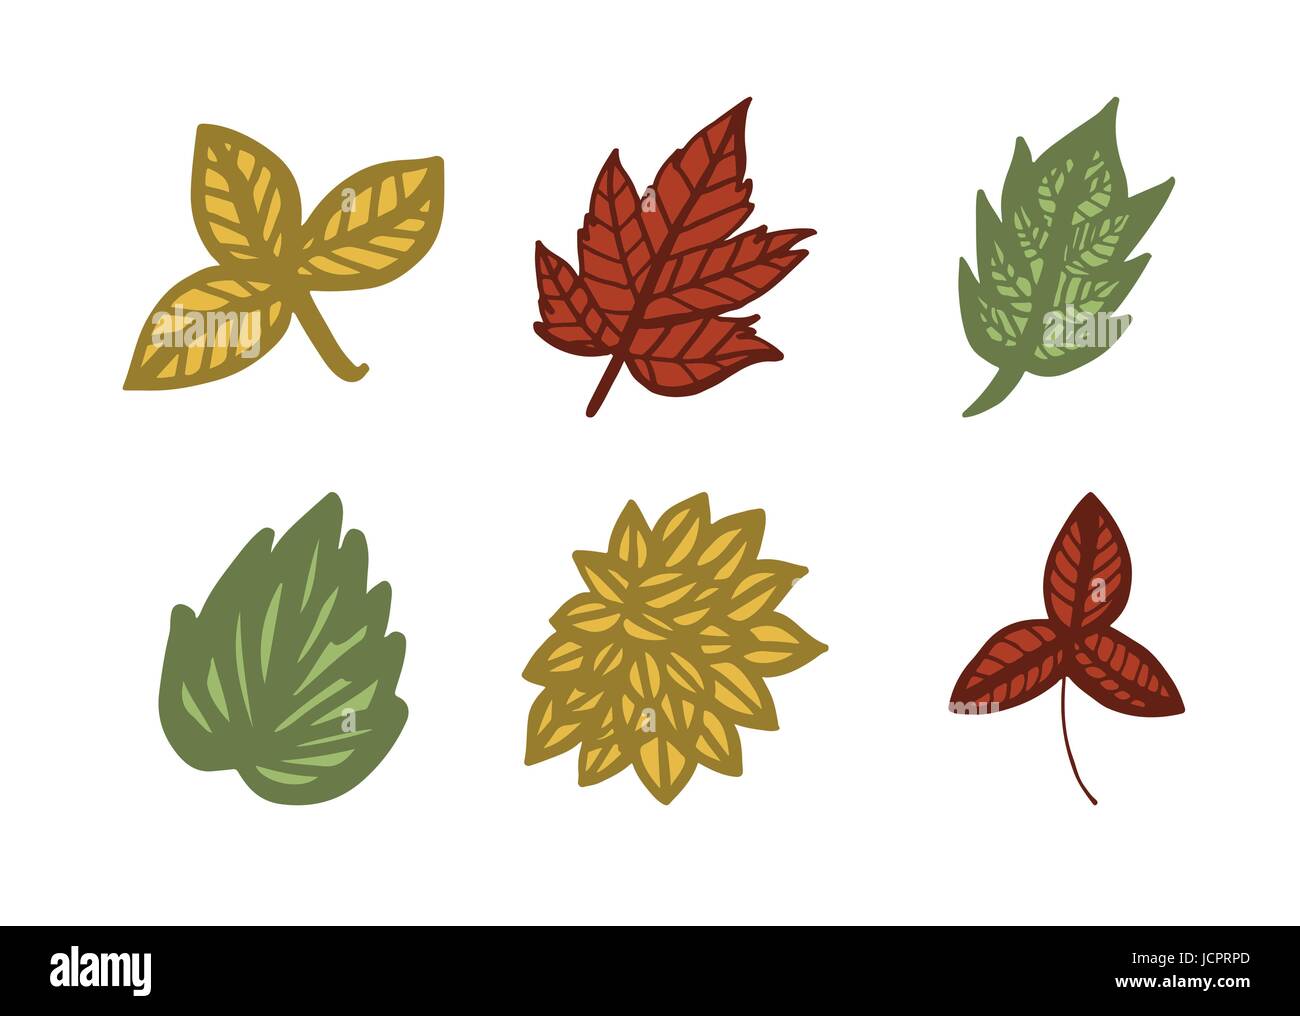 Vector icon of autumn leaves Stock Vector